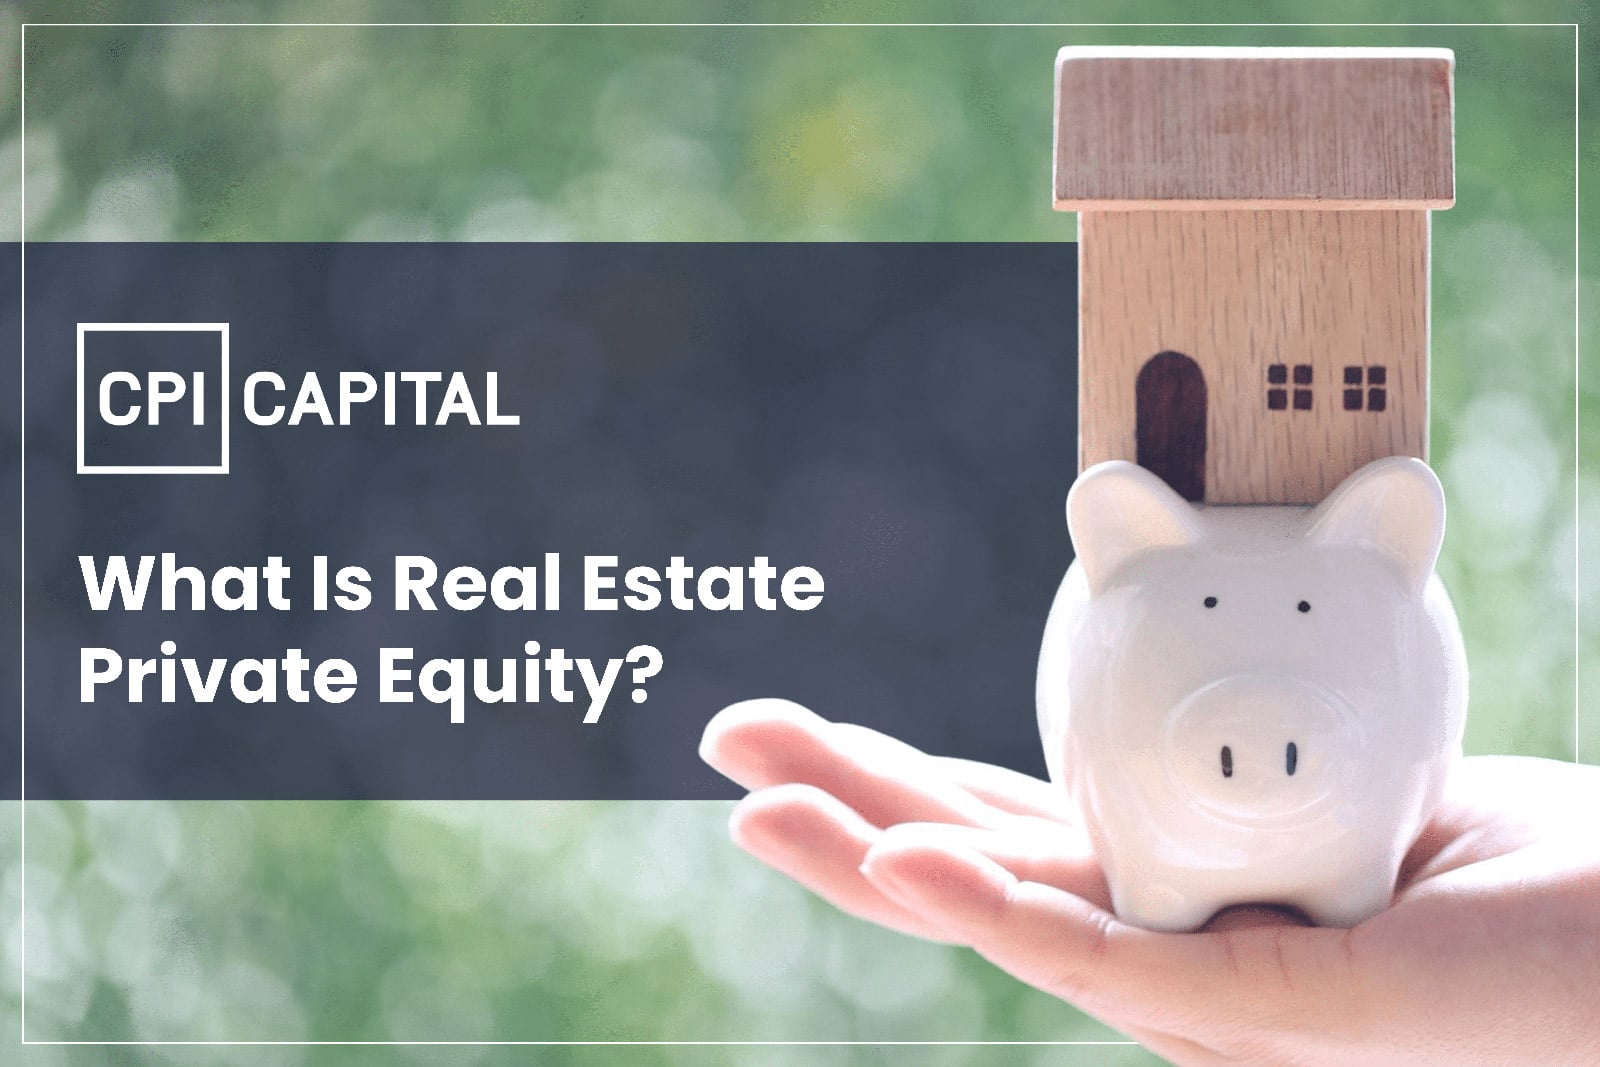 What is Real Estate Private Equity?